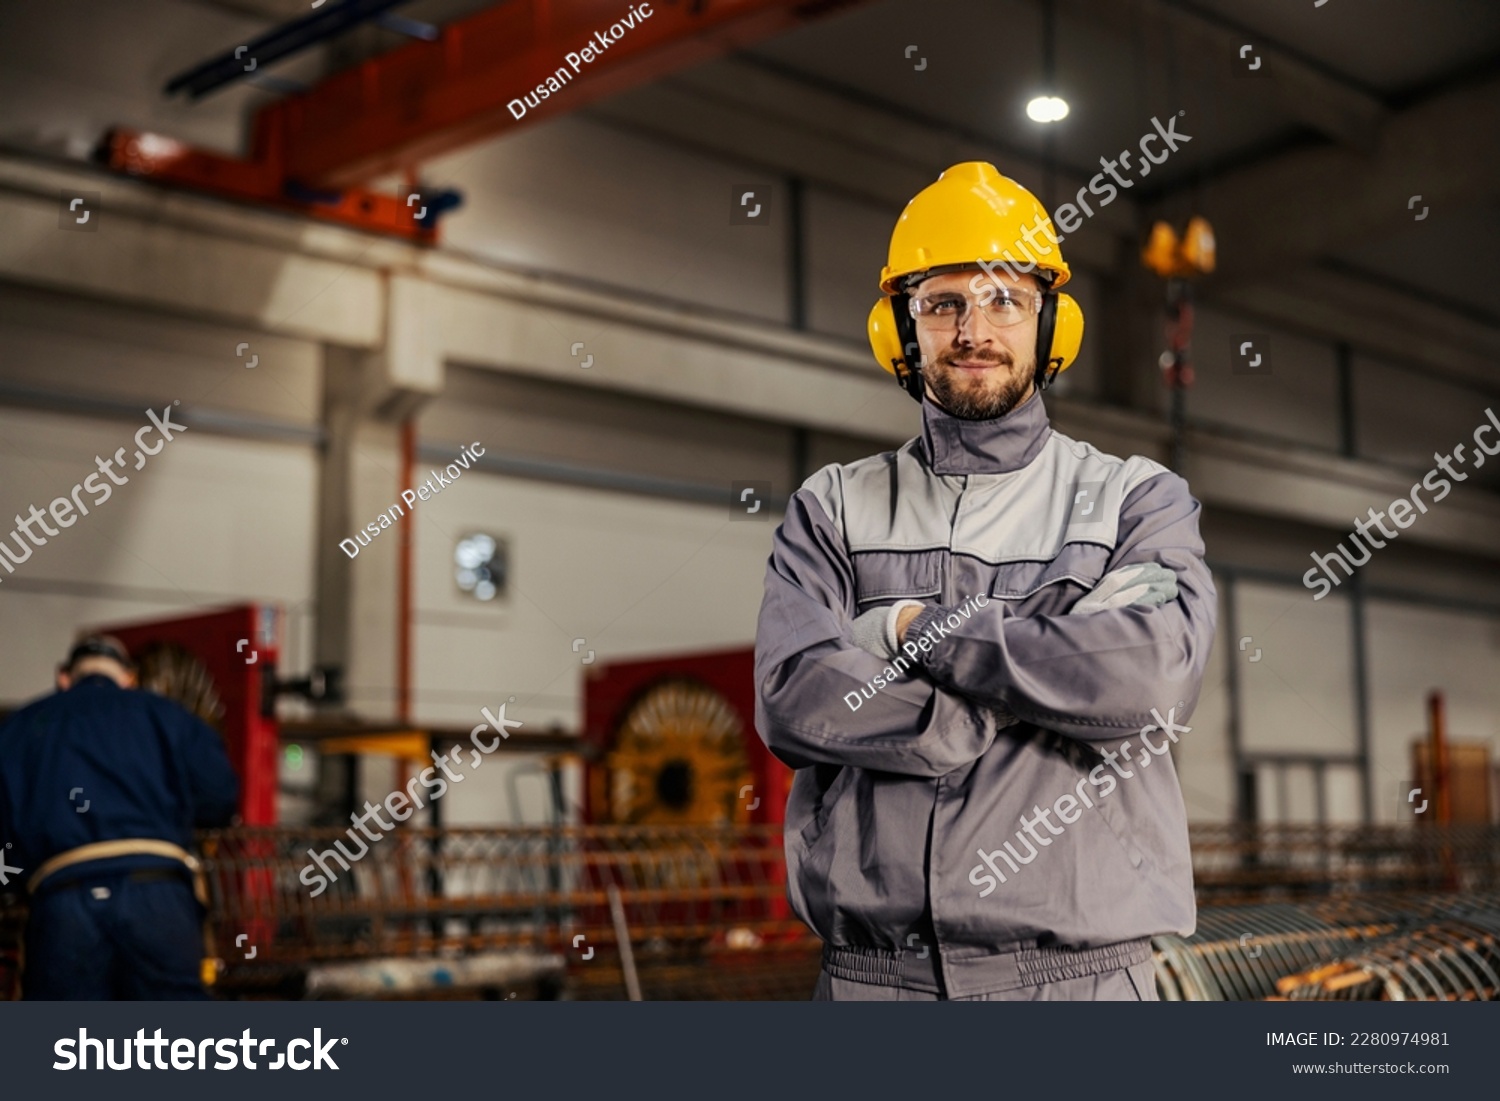 A heavy industry and metallurgy worker in protective uniform is proudly standing in facility and smiling at the camera. #2280974981